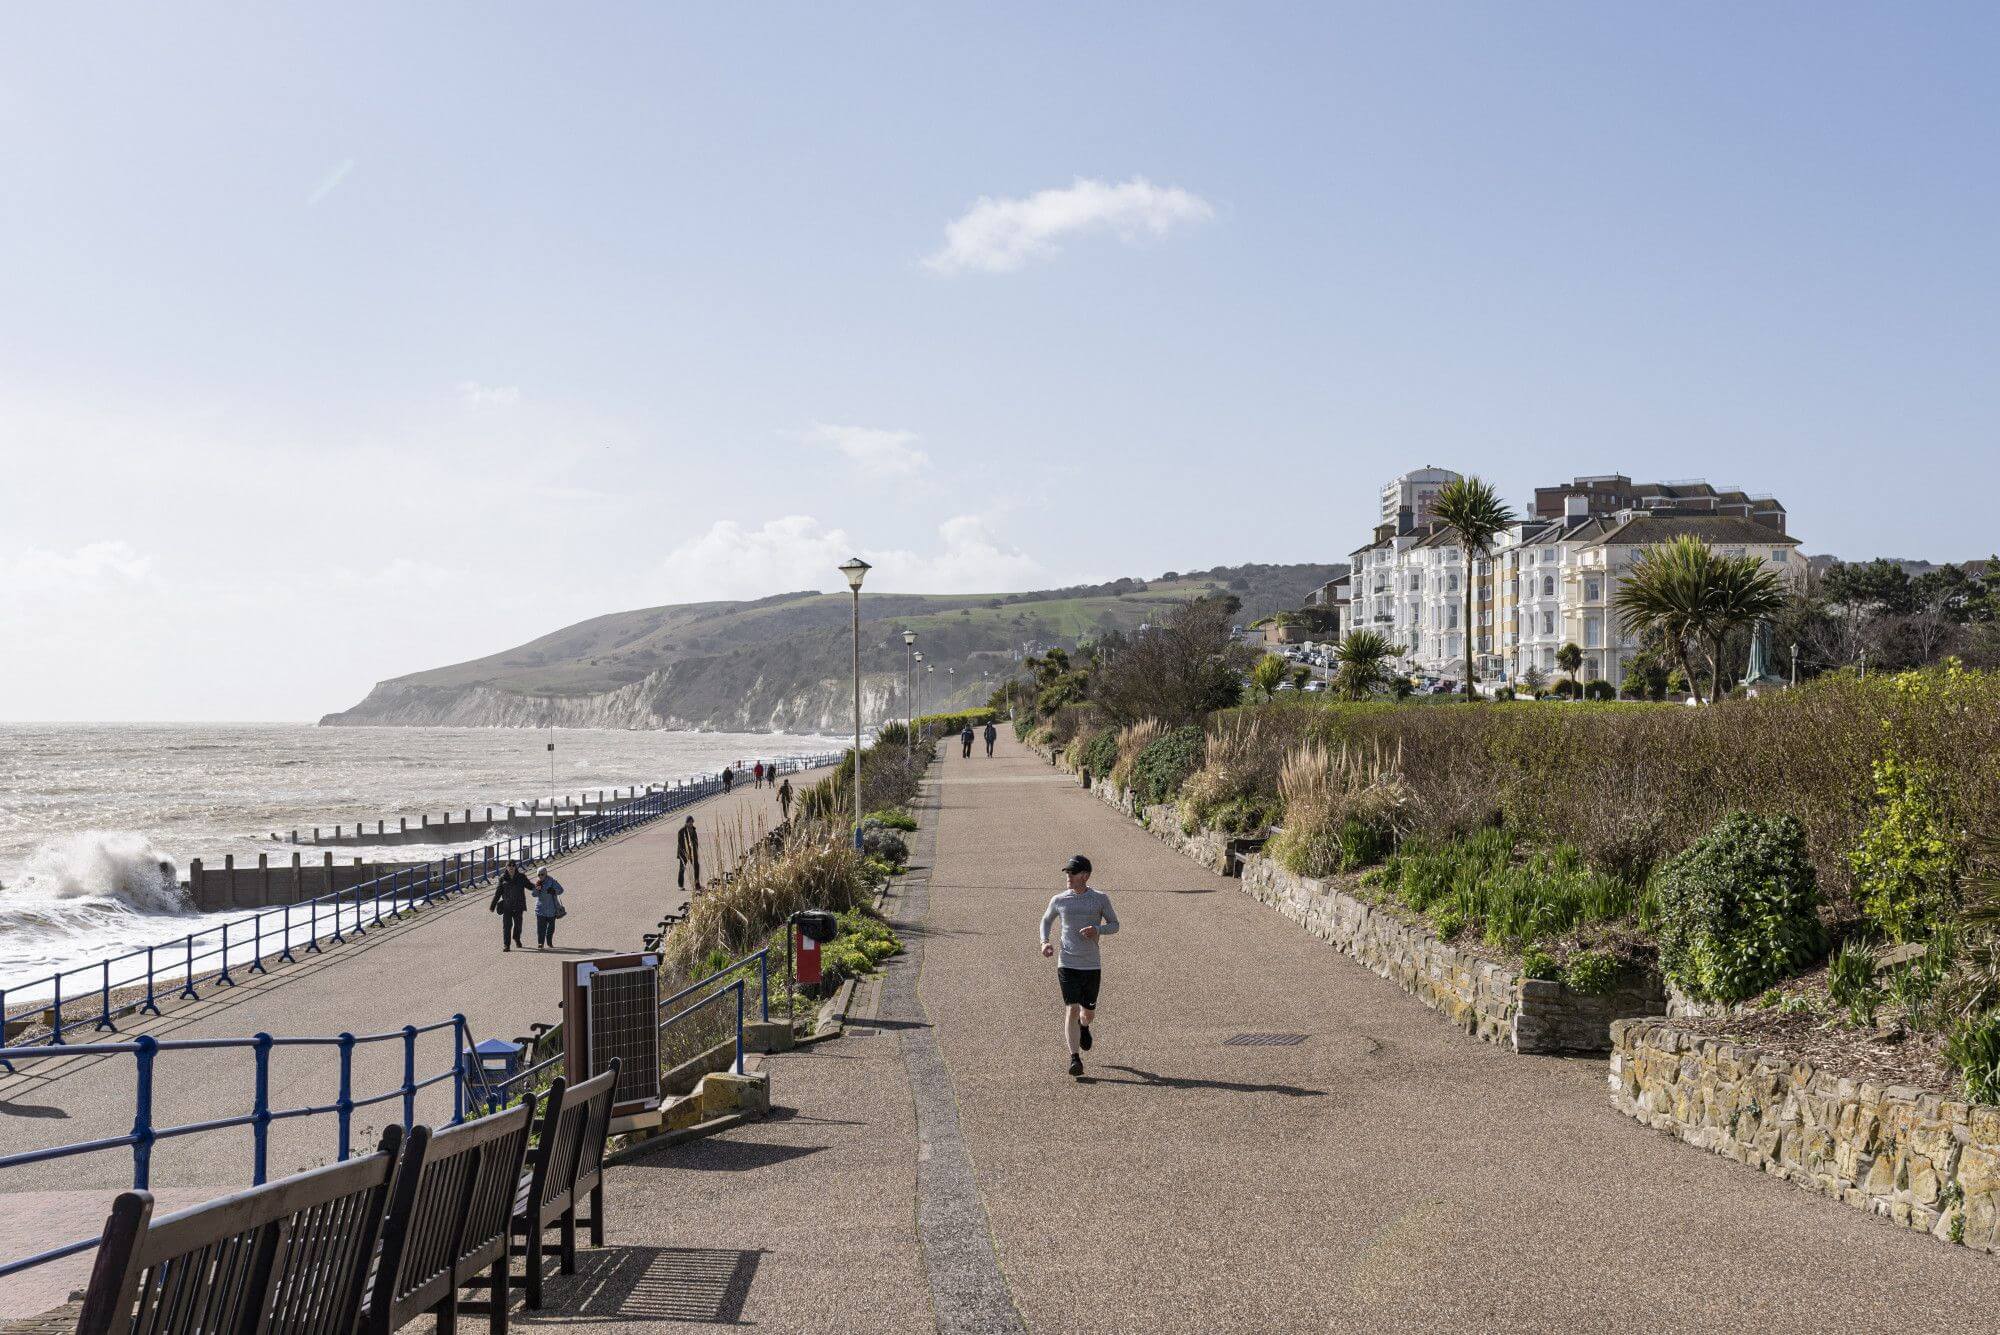 Eastbourne Seafront. Photo by Thierry Bal.